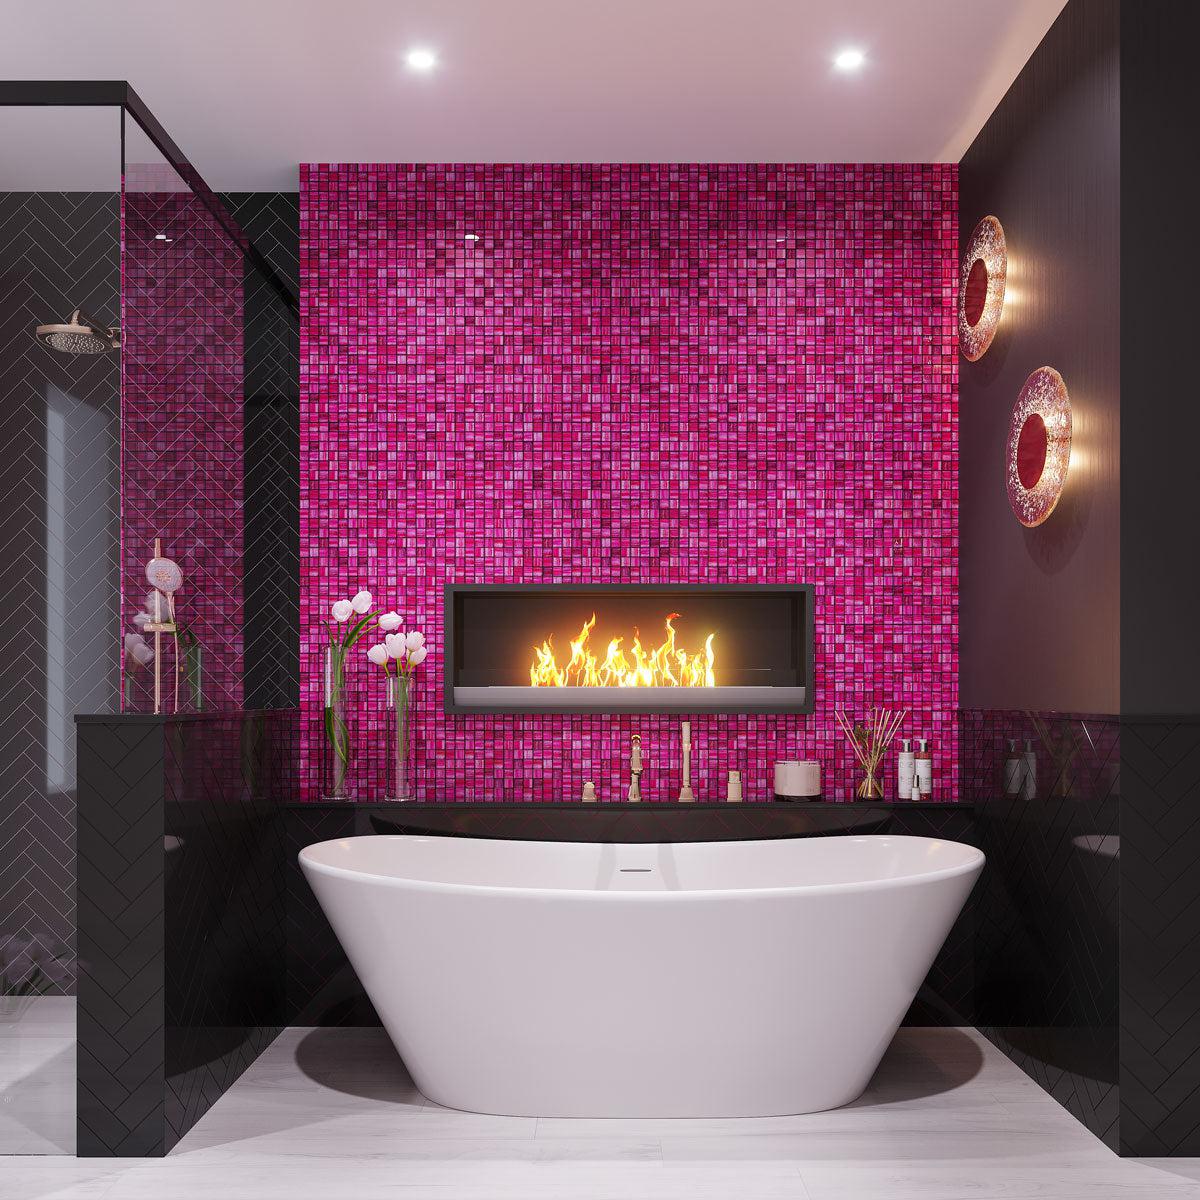 Glamorous Pink and Black Bathroom with Glass Mosaic Wall Tile